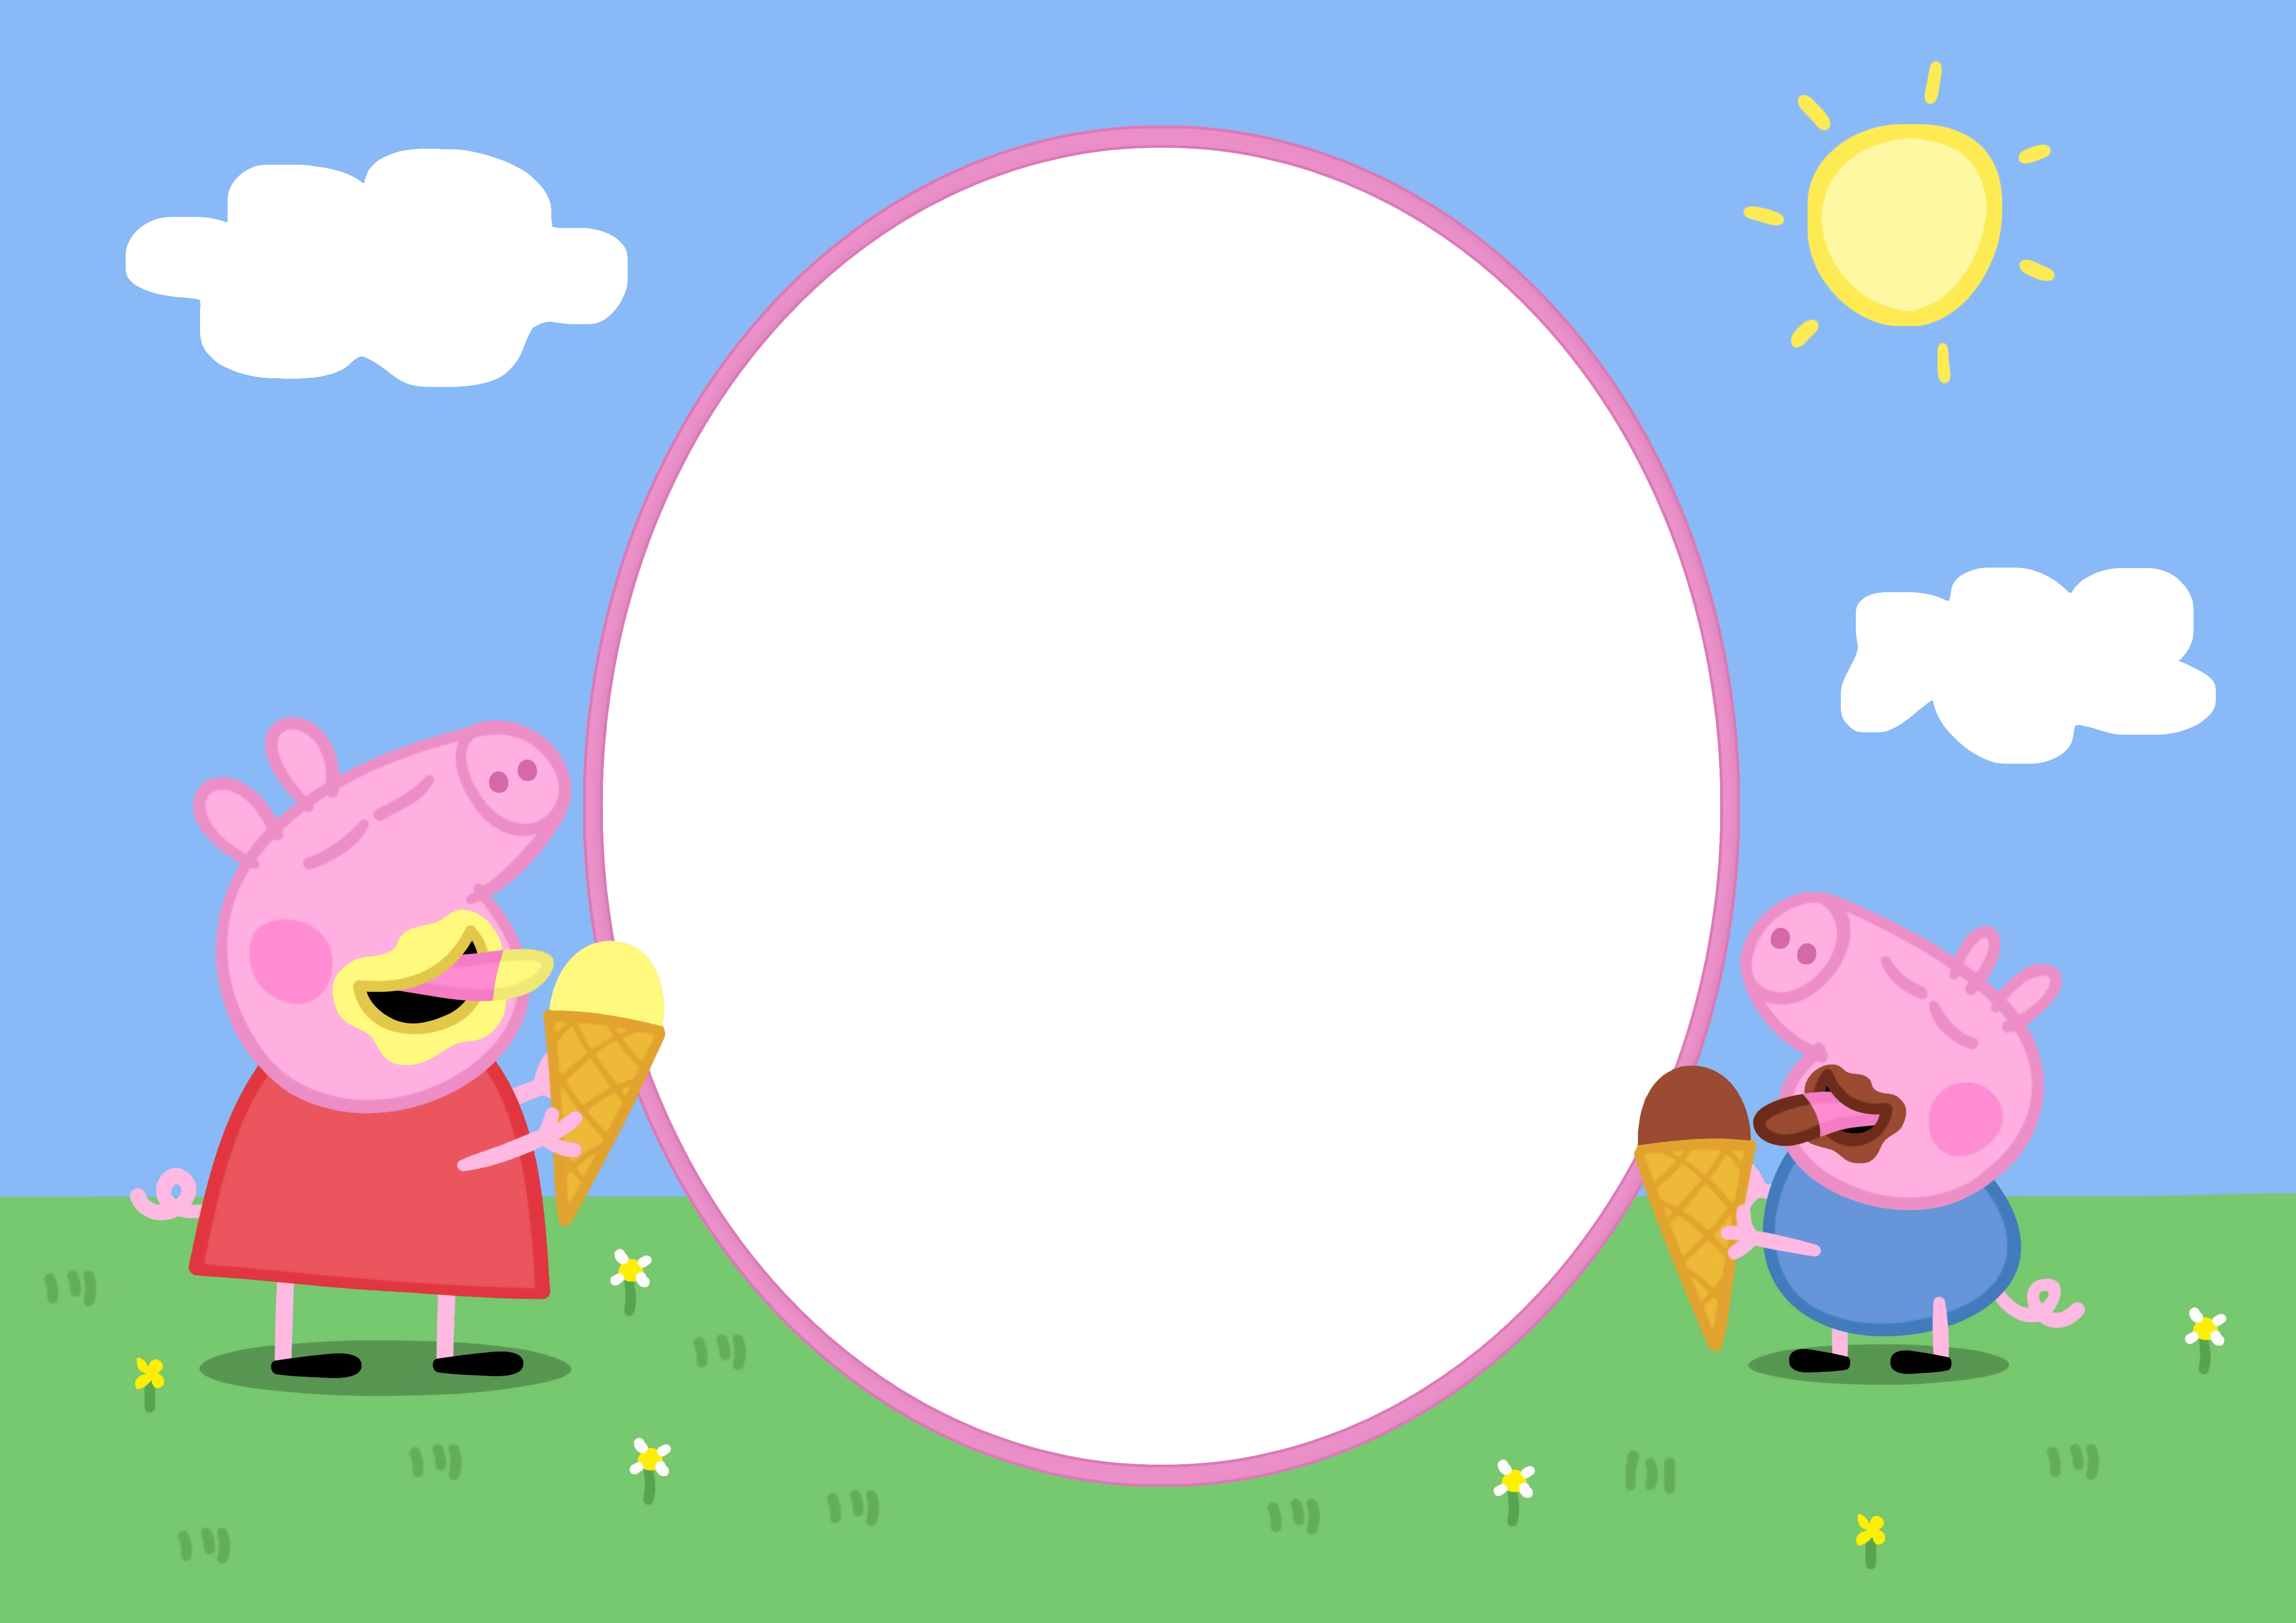 Peppa Pig Family Wallpapers - Wallpaper Cave